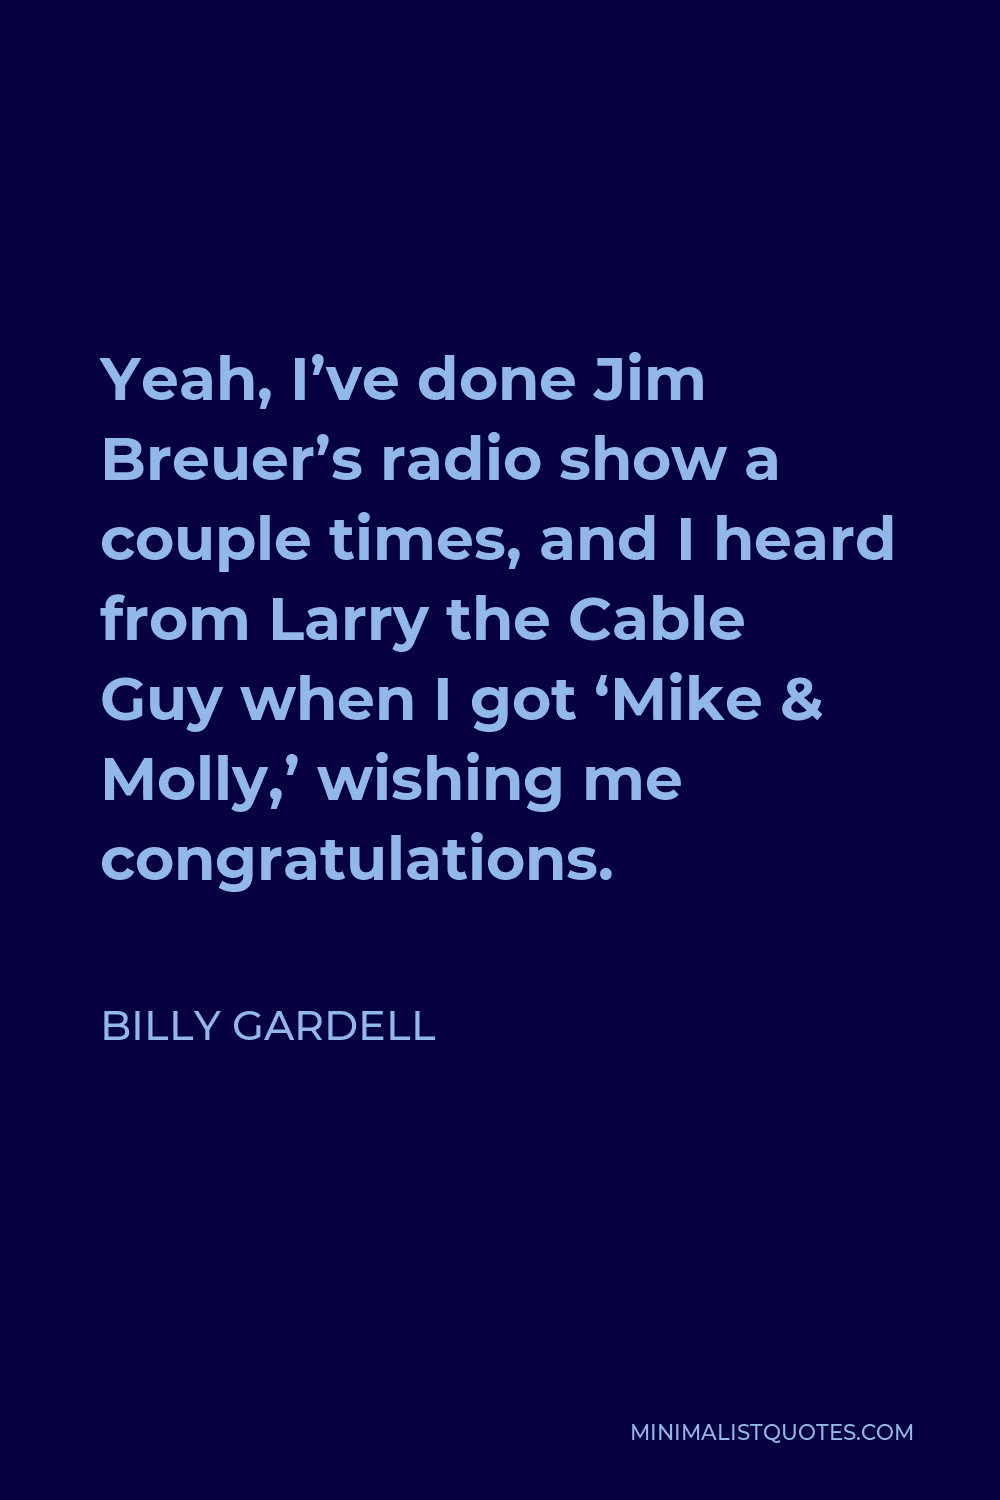 Billy Gardell Quote - Yeah, I’ve done Jim Breuer’s radio show a couple times, and I heard from Larry the Cable Guy when I got ‘Mike & Molly,’ wishing me congratulations.